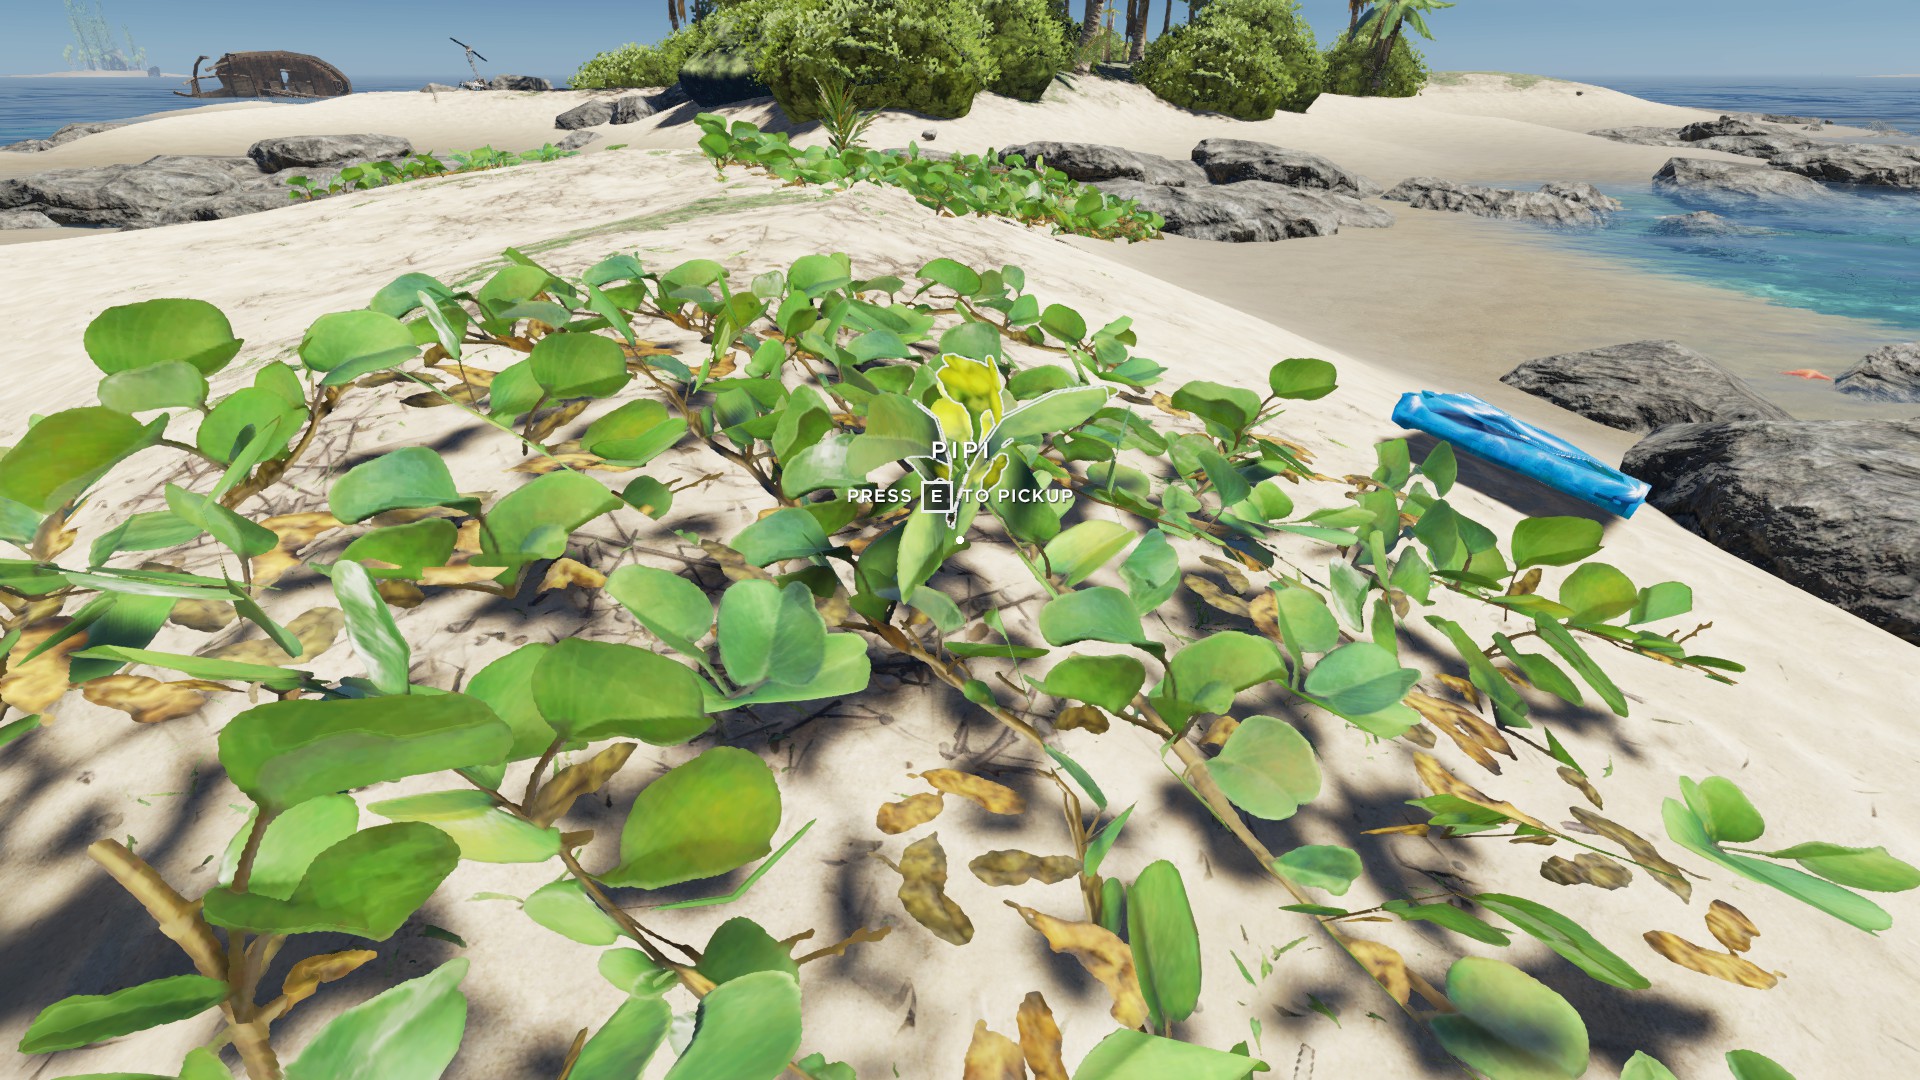 All My Plants Died, Stranded Deep Gameplay